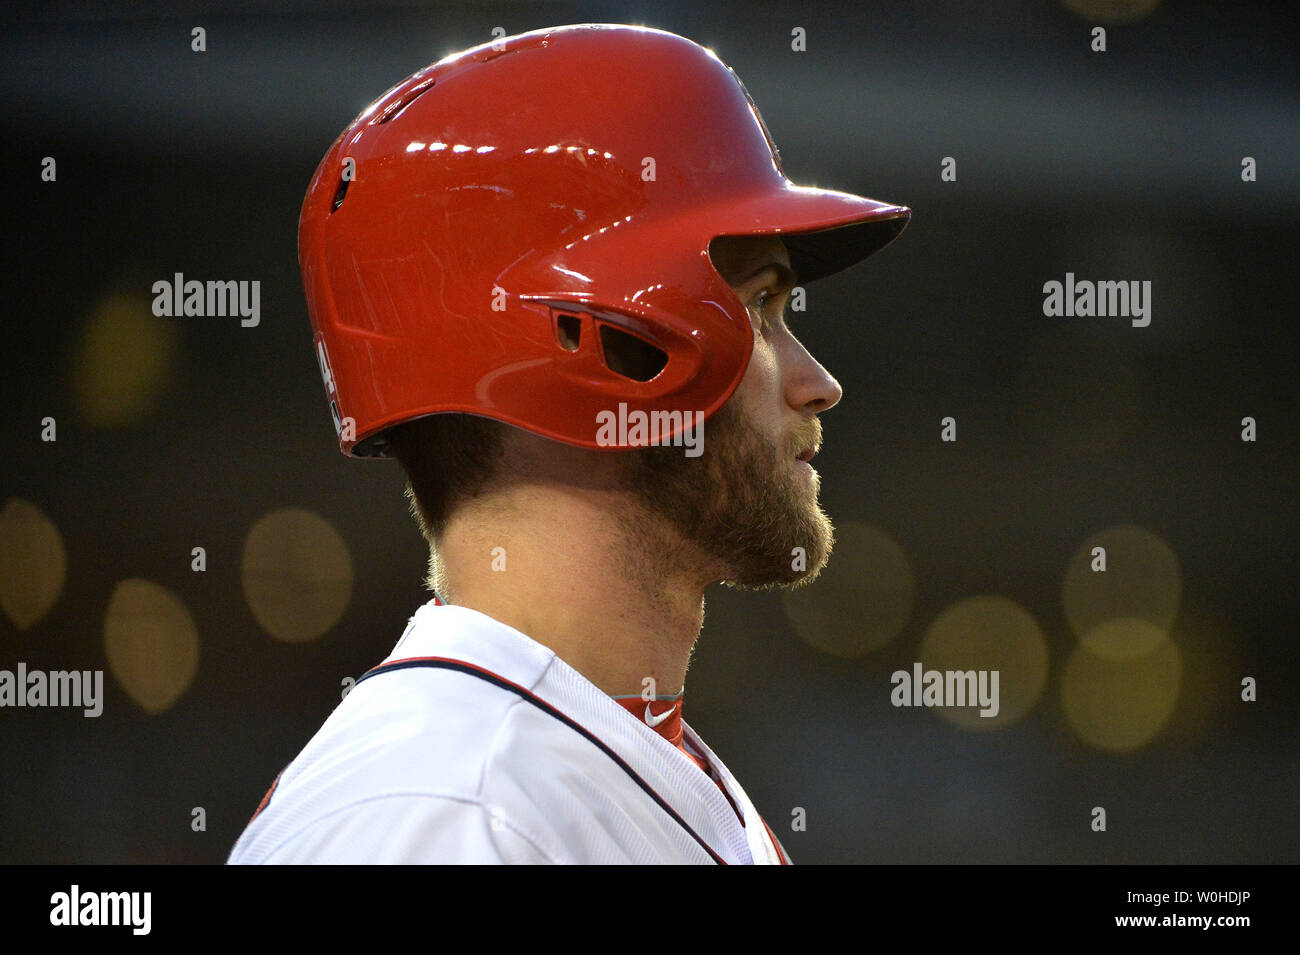 Washington Nationals Bryce Harper waits to bat in the third inning against the L.A. Agnles at Nationals Park in Washington, D.C. on April 23, 2014.  UPI/Kevin Dietsch Stock Photo